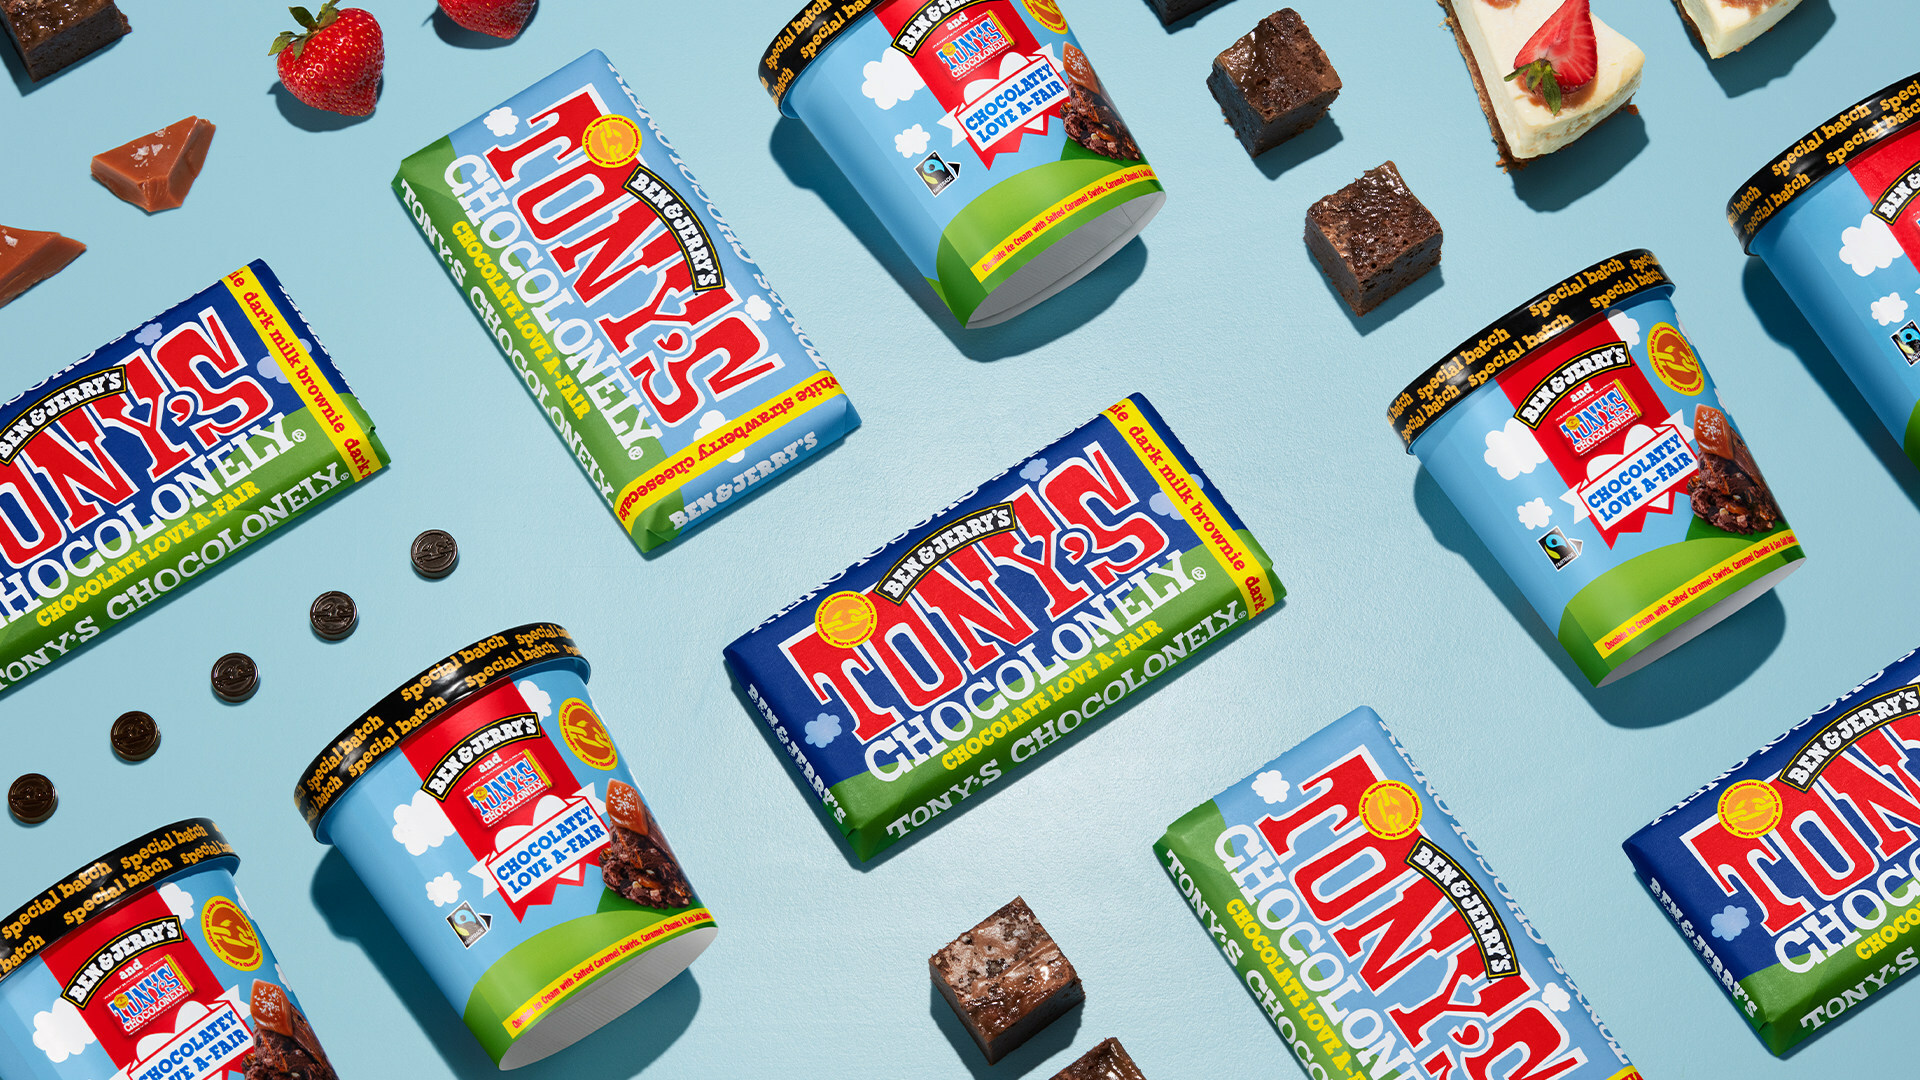 Tony’s Chocolonely and Ben & Jerry’s launch new limited-edition chocolate bars and ice cream flavor to celebrate their impact-driven “Chocolate Love A-Fair”